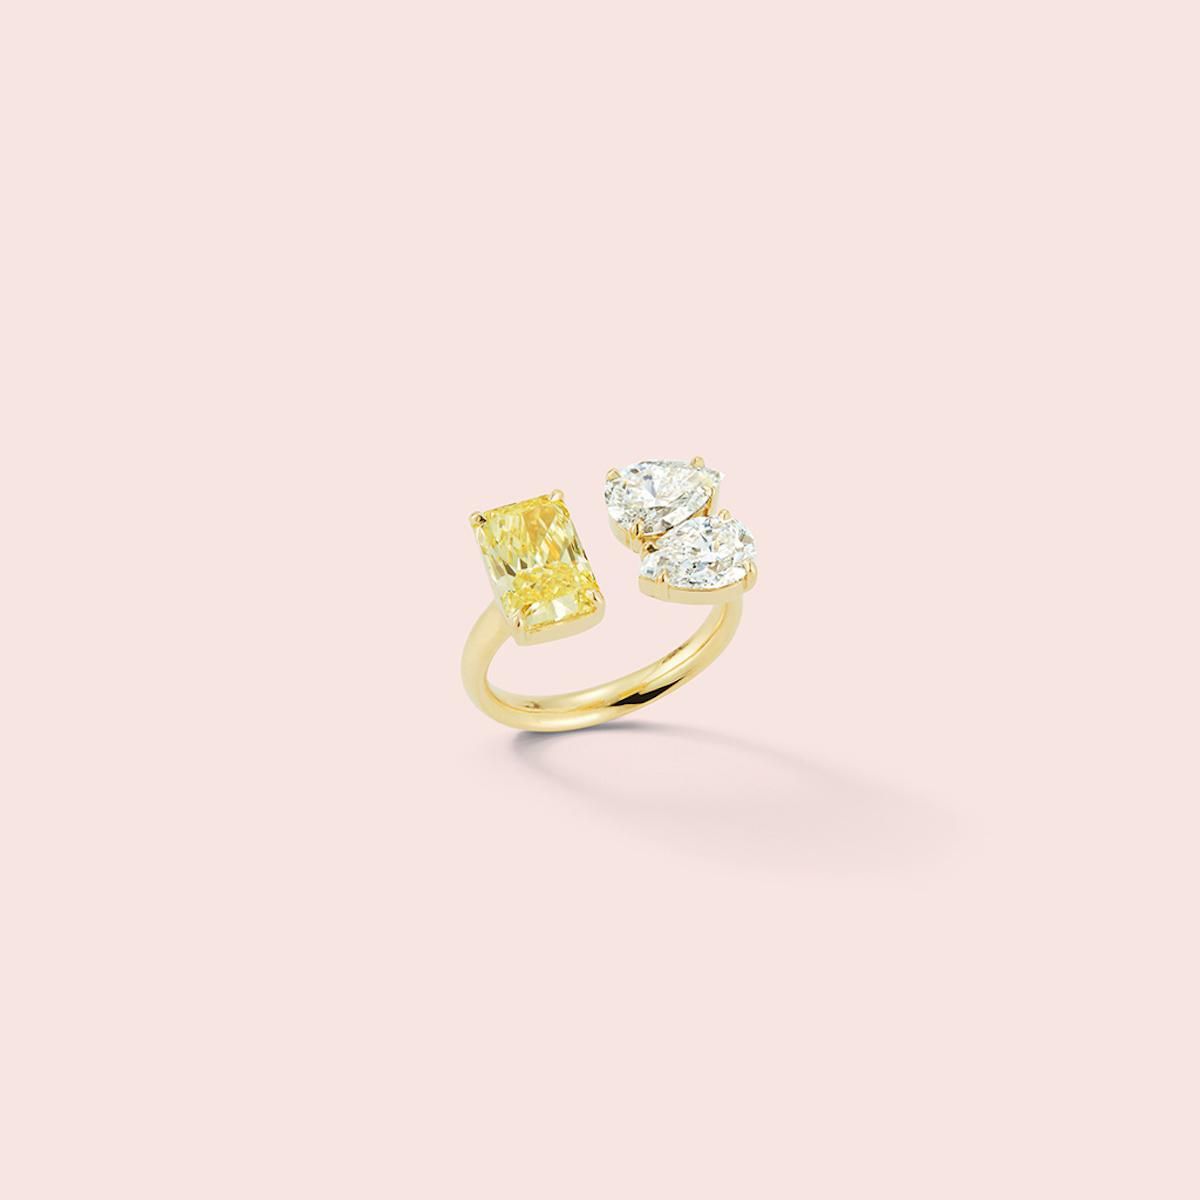 35 Uniquely Shaped Engagement Rings For The Unconventional Bride With Recent Sparkling Square & Circle Open Rings (View 12 of 25)